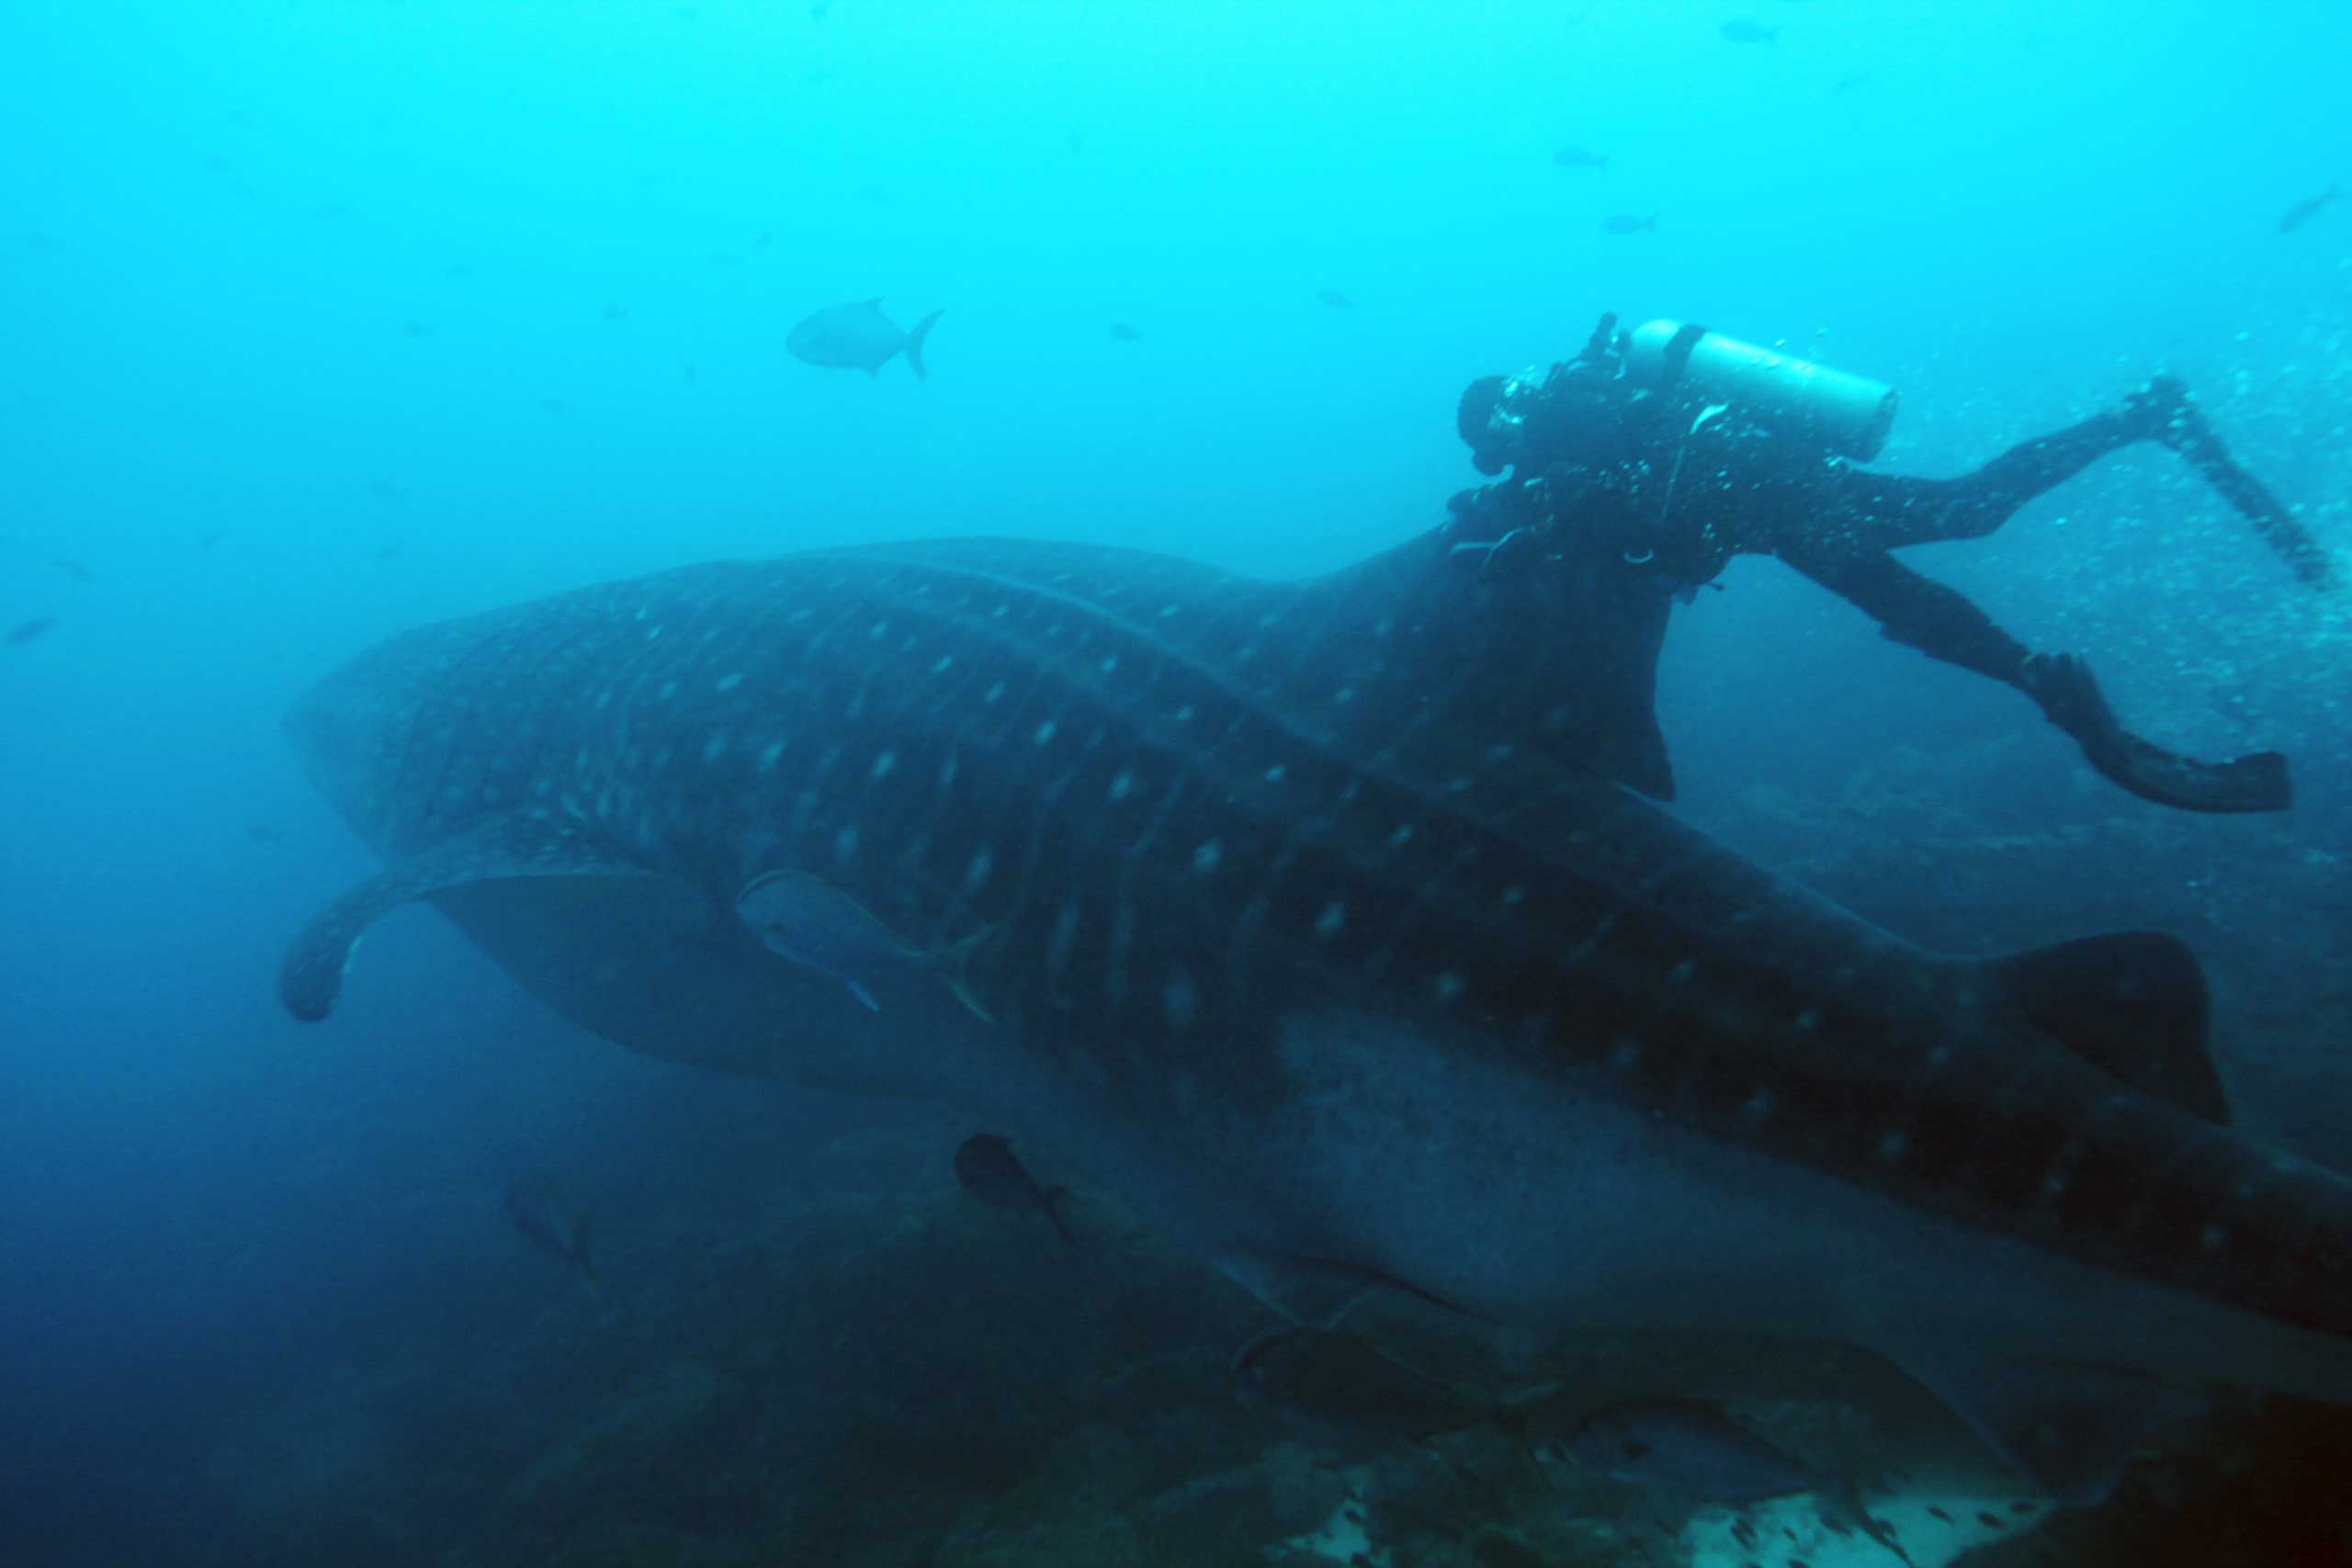 One of Aldrin's lifelong interests is underwater exploration and scuba diving. It is the  closest thing to weightlessness in space  Aldrin has said. Here he is seen htching a ride on a whale shark in the Galapagos Islands in June 2010.